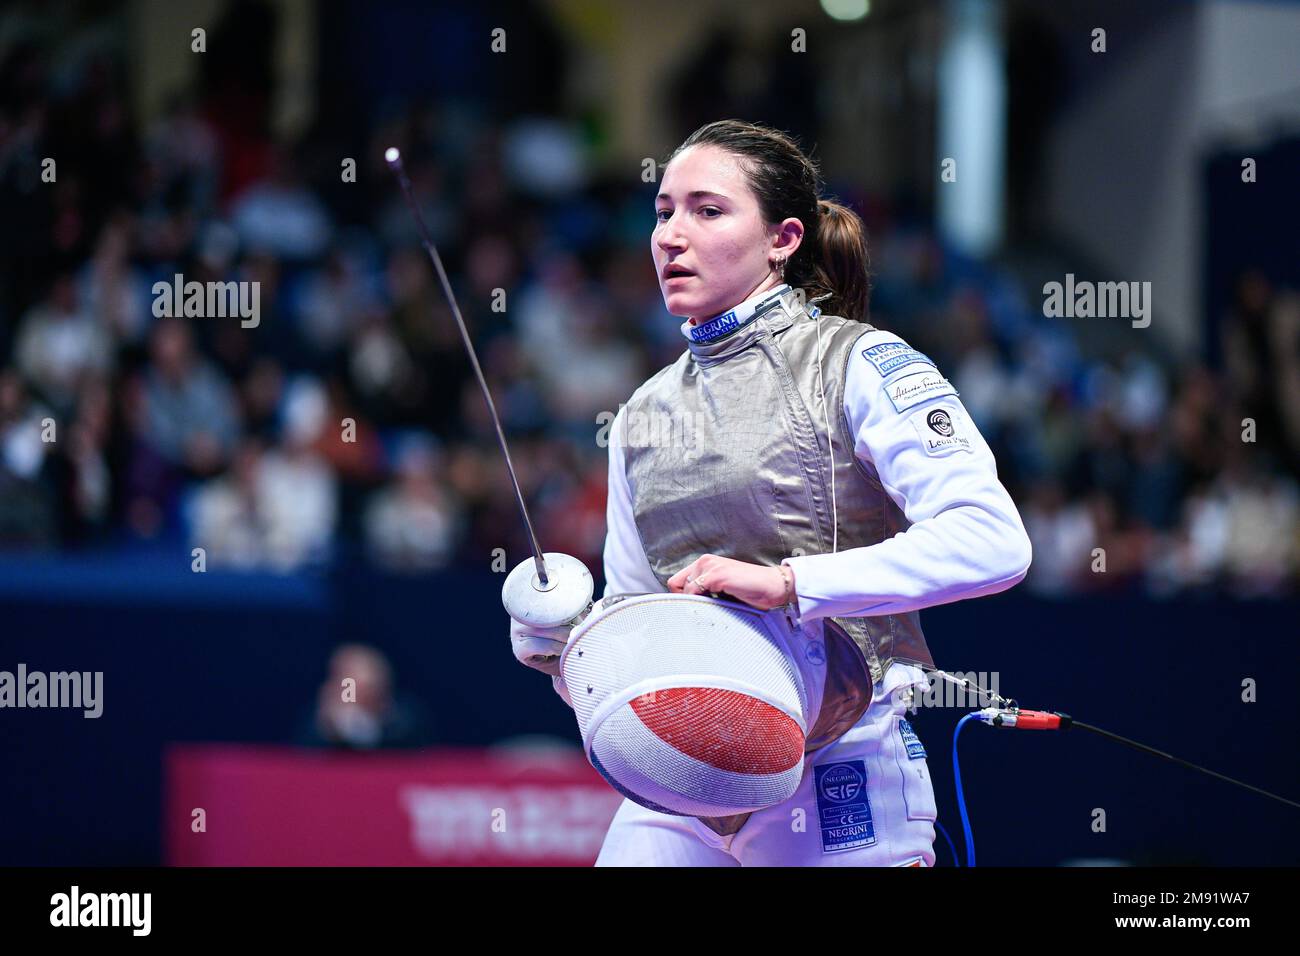 CATARZI Constance (FRA) during the Mazars Challenge International of Fencing (foil) at Stade Pierre de Coubertin on January 14, 2023 in Paris, France. Stock Photo